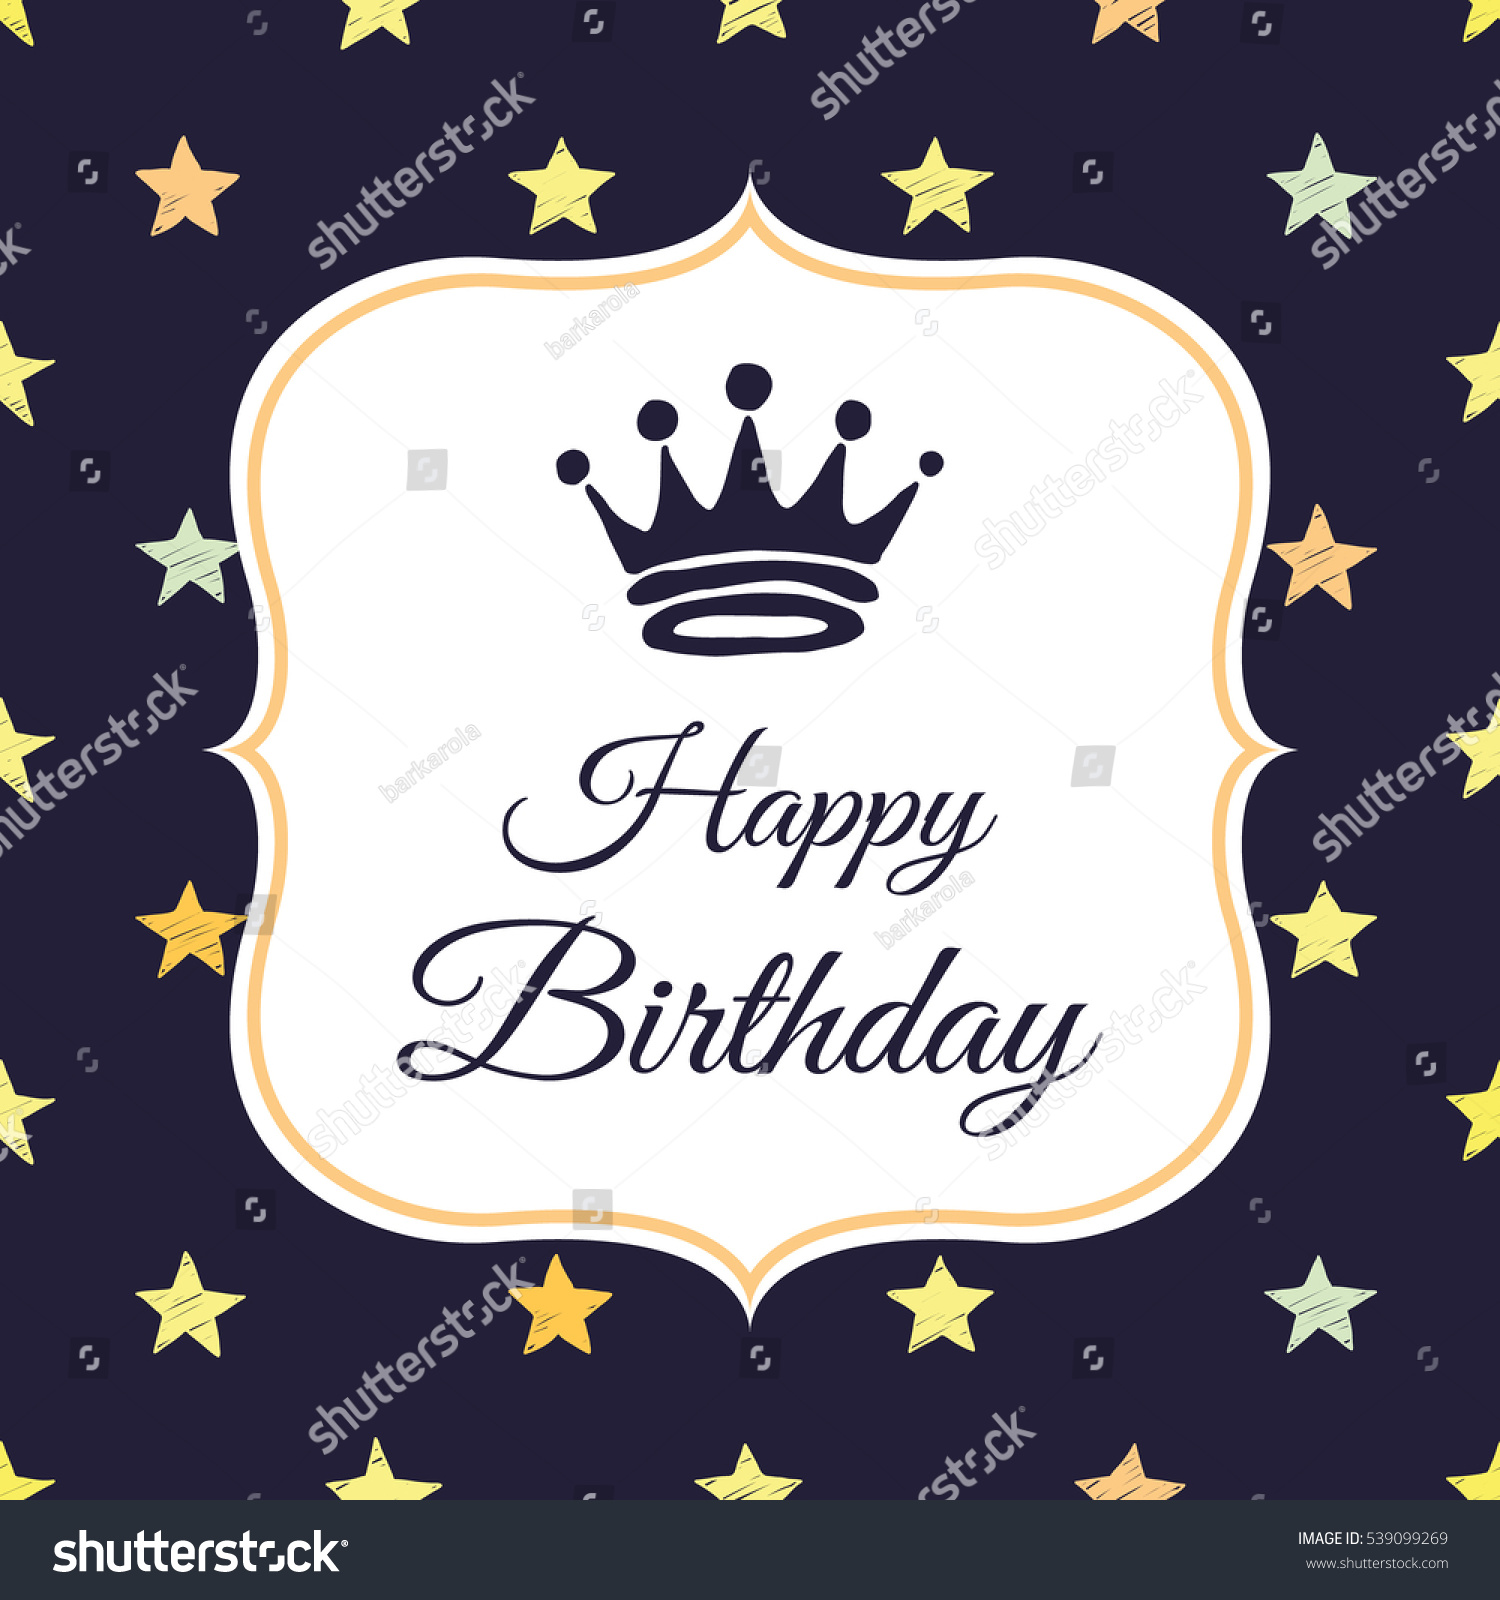 Cute Greeting Card With A Crown. "Happy Birthday" Message ...